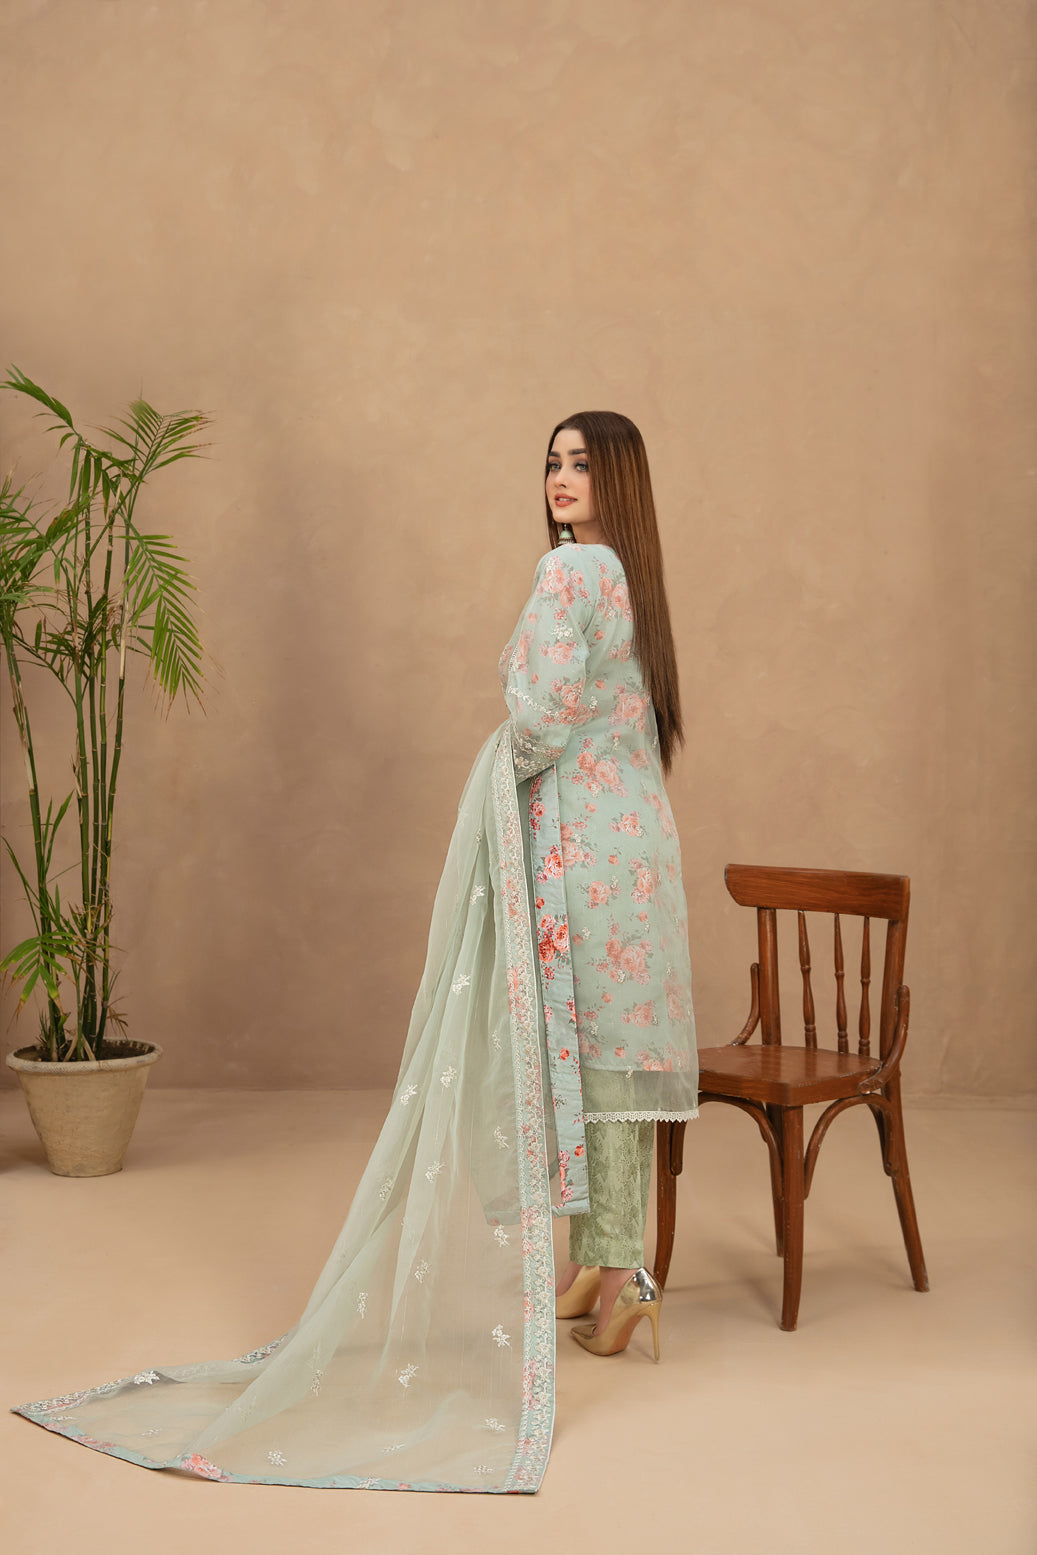 Tawakkal Fabrics 3 Piece Stitched Fancy Heavy Embroidered Organza Suit D-9367